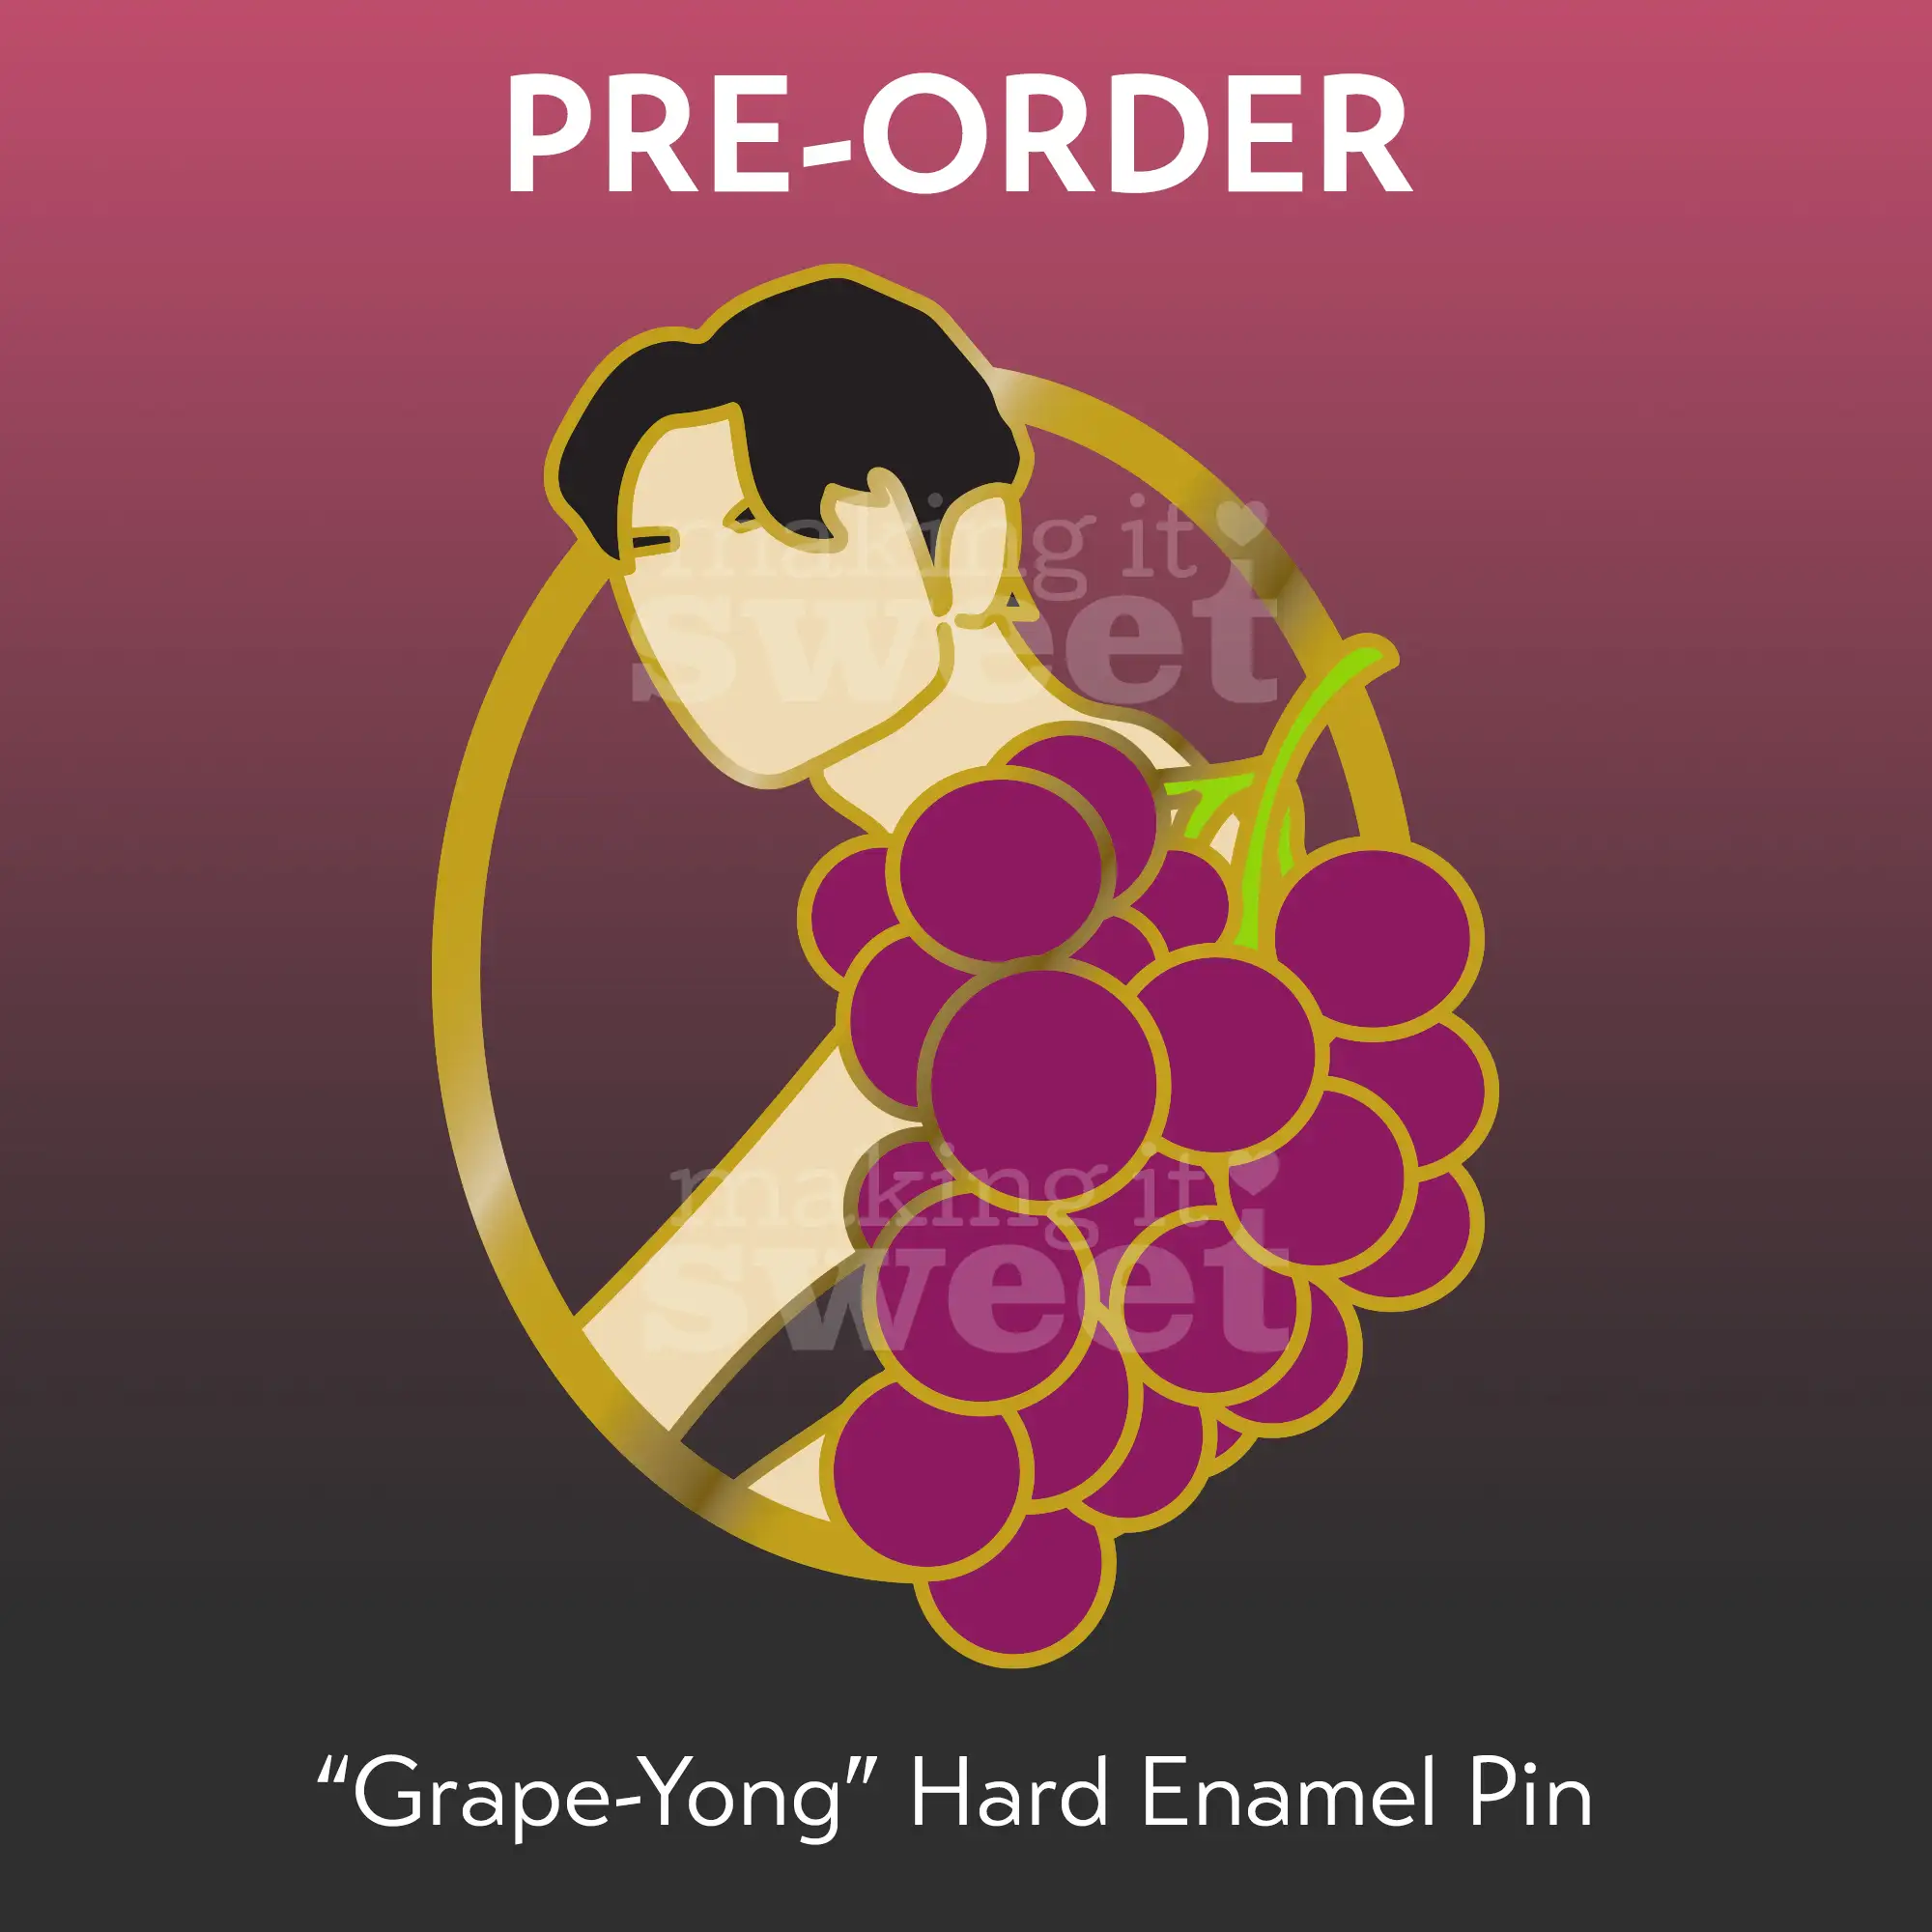 Enamel Pin Updates and Sticker Production Delays